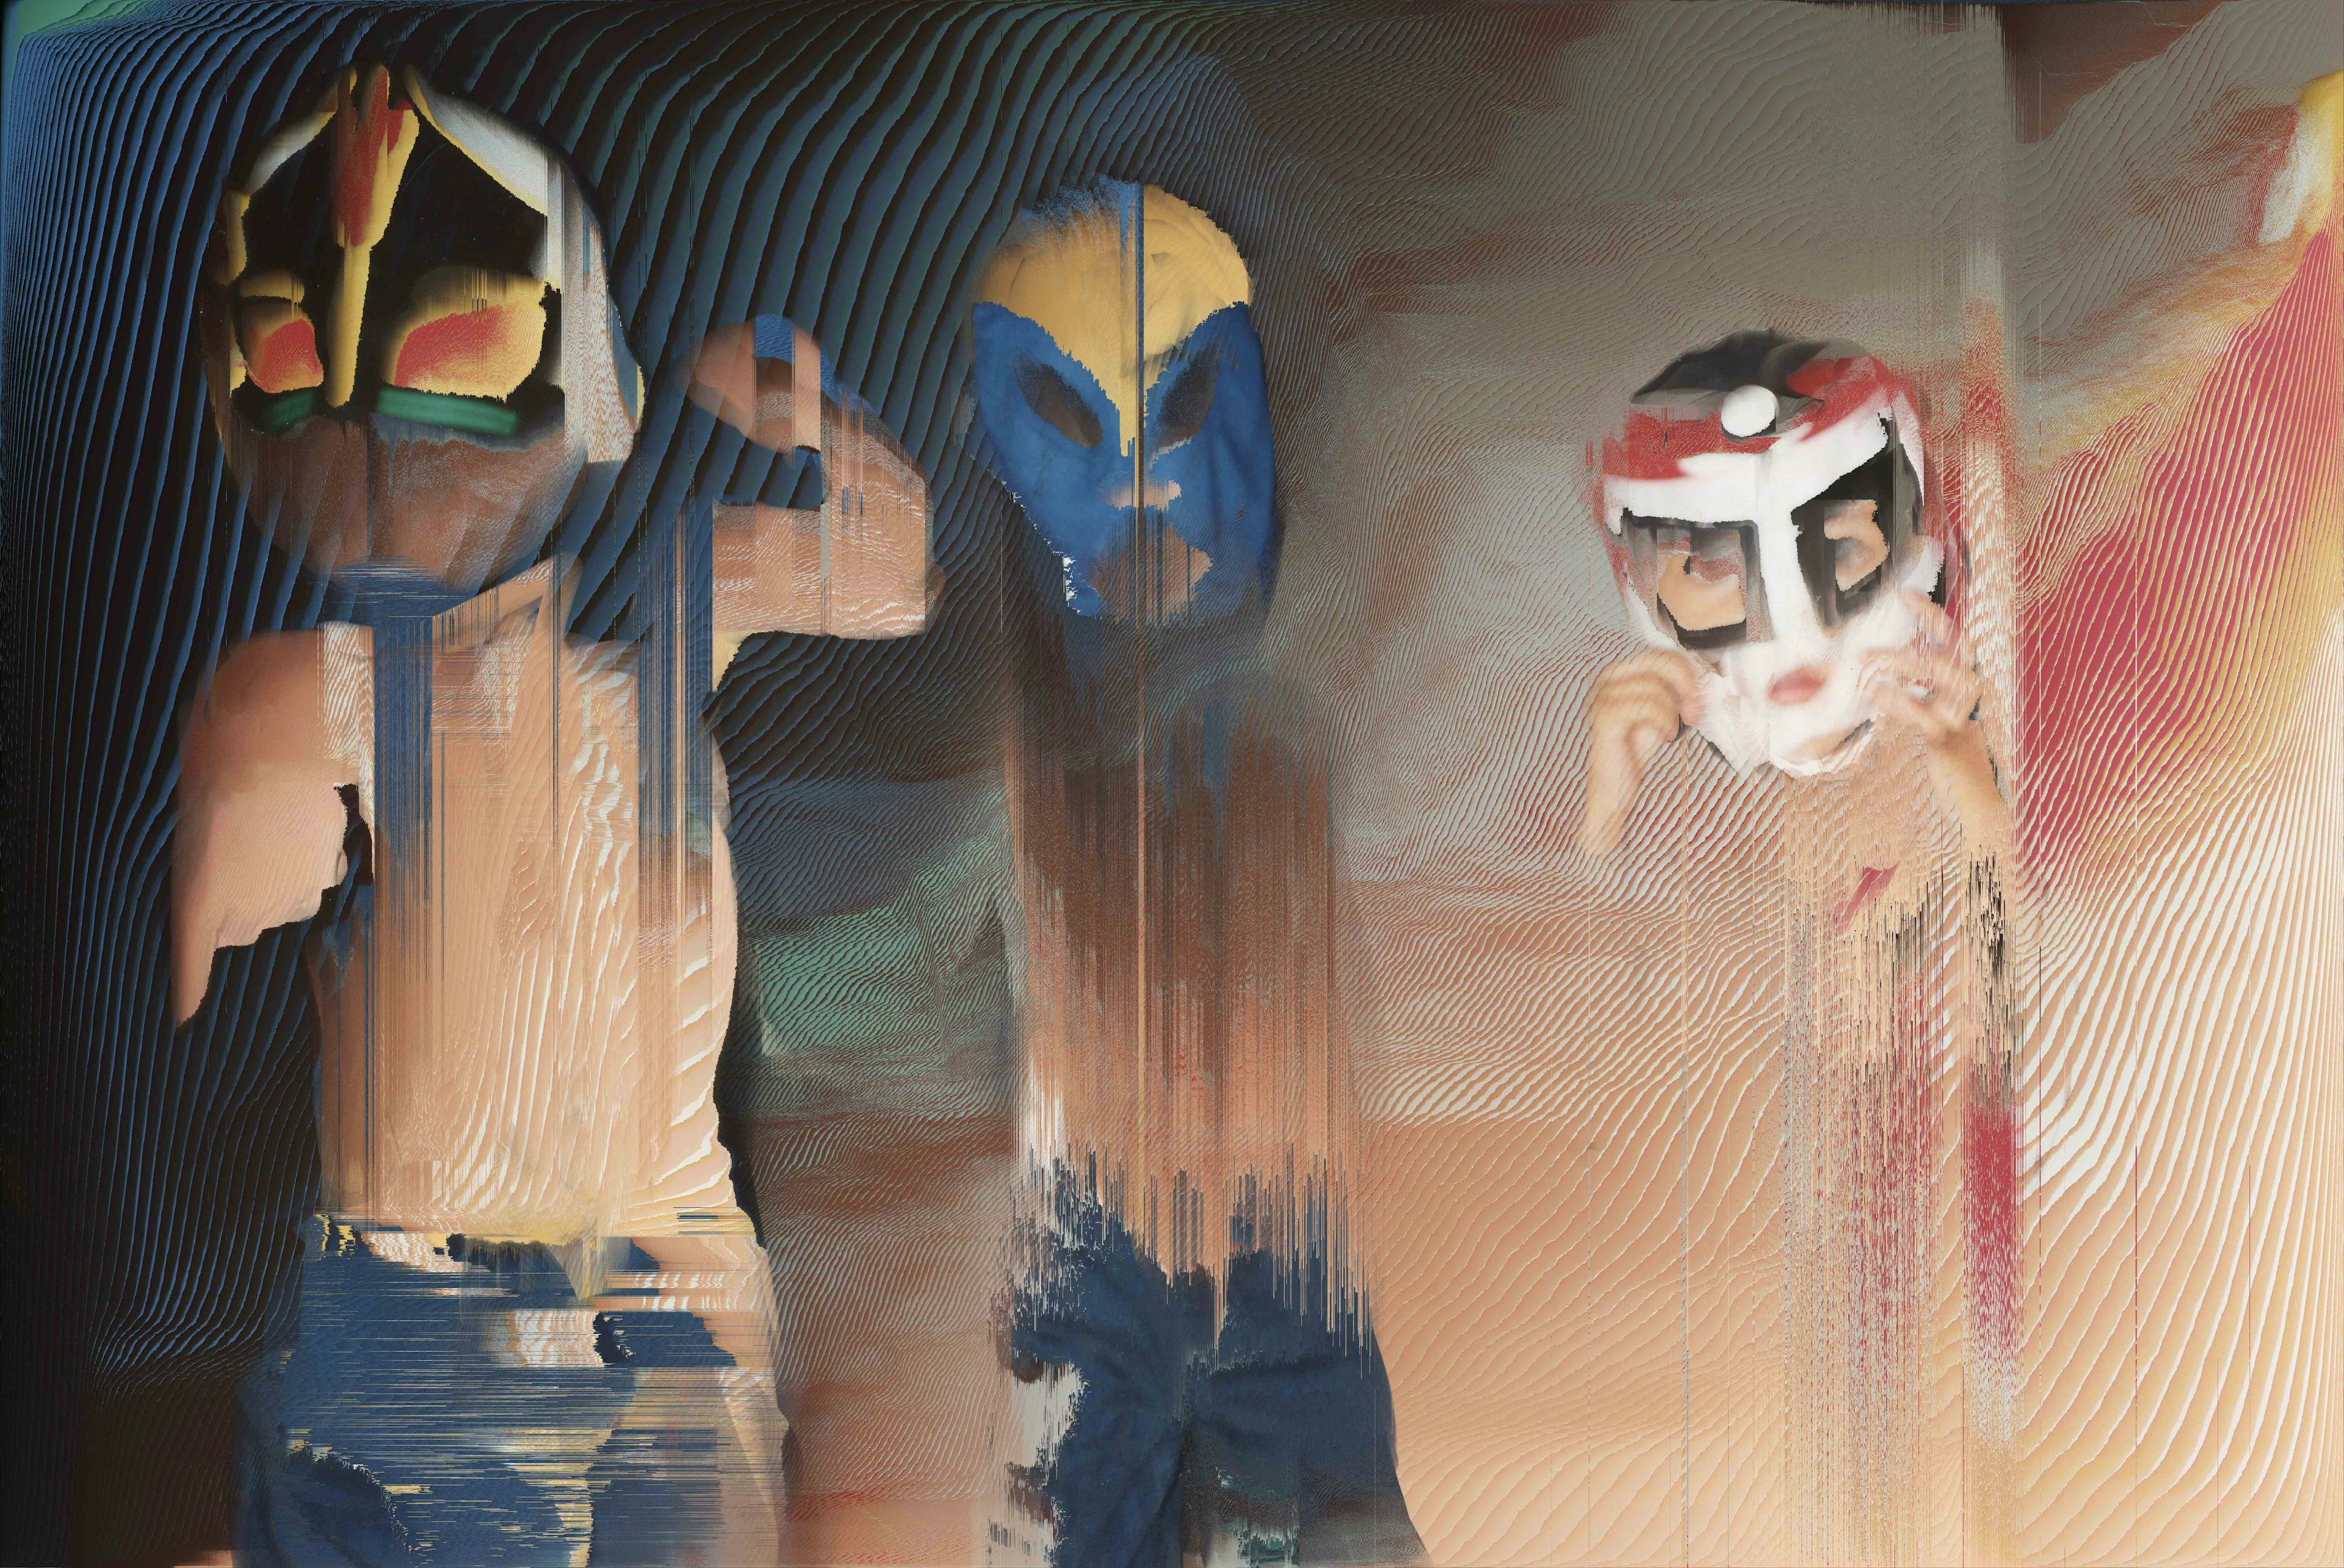 Archival photograph of three kids with colourful lucha libre masks on. The pixels are manipulated and wipe out the background © Cristóbal Ascencio Ramos